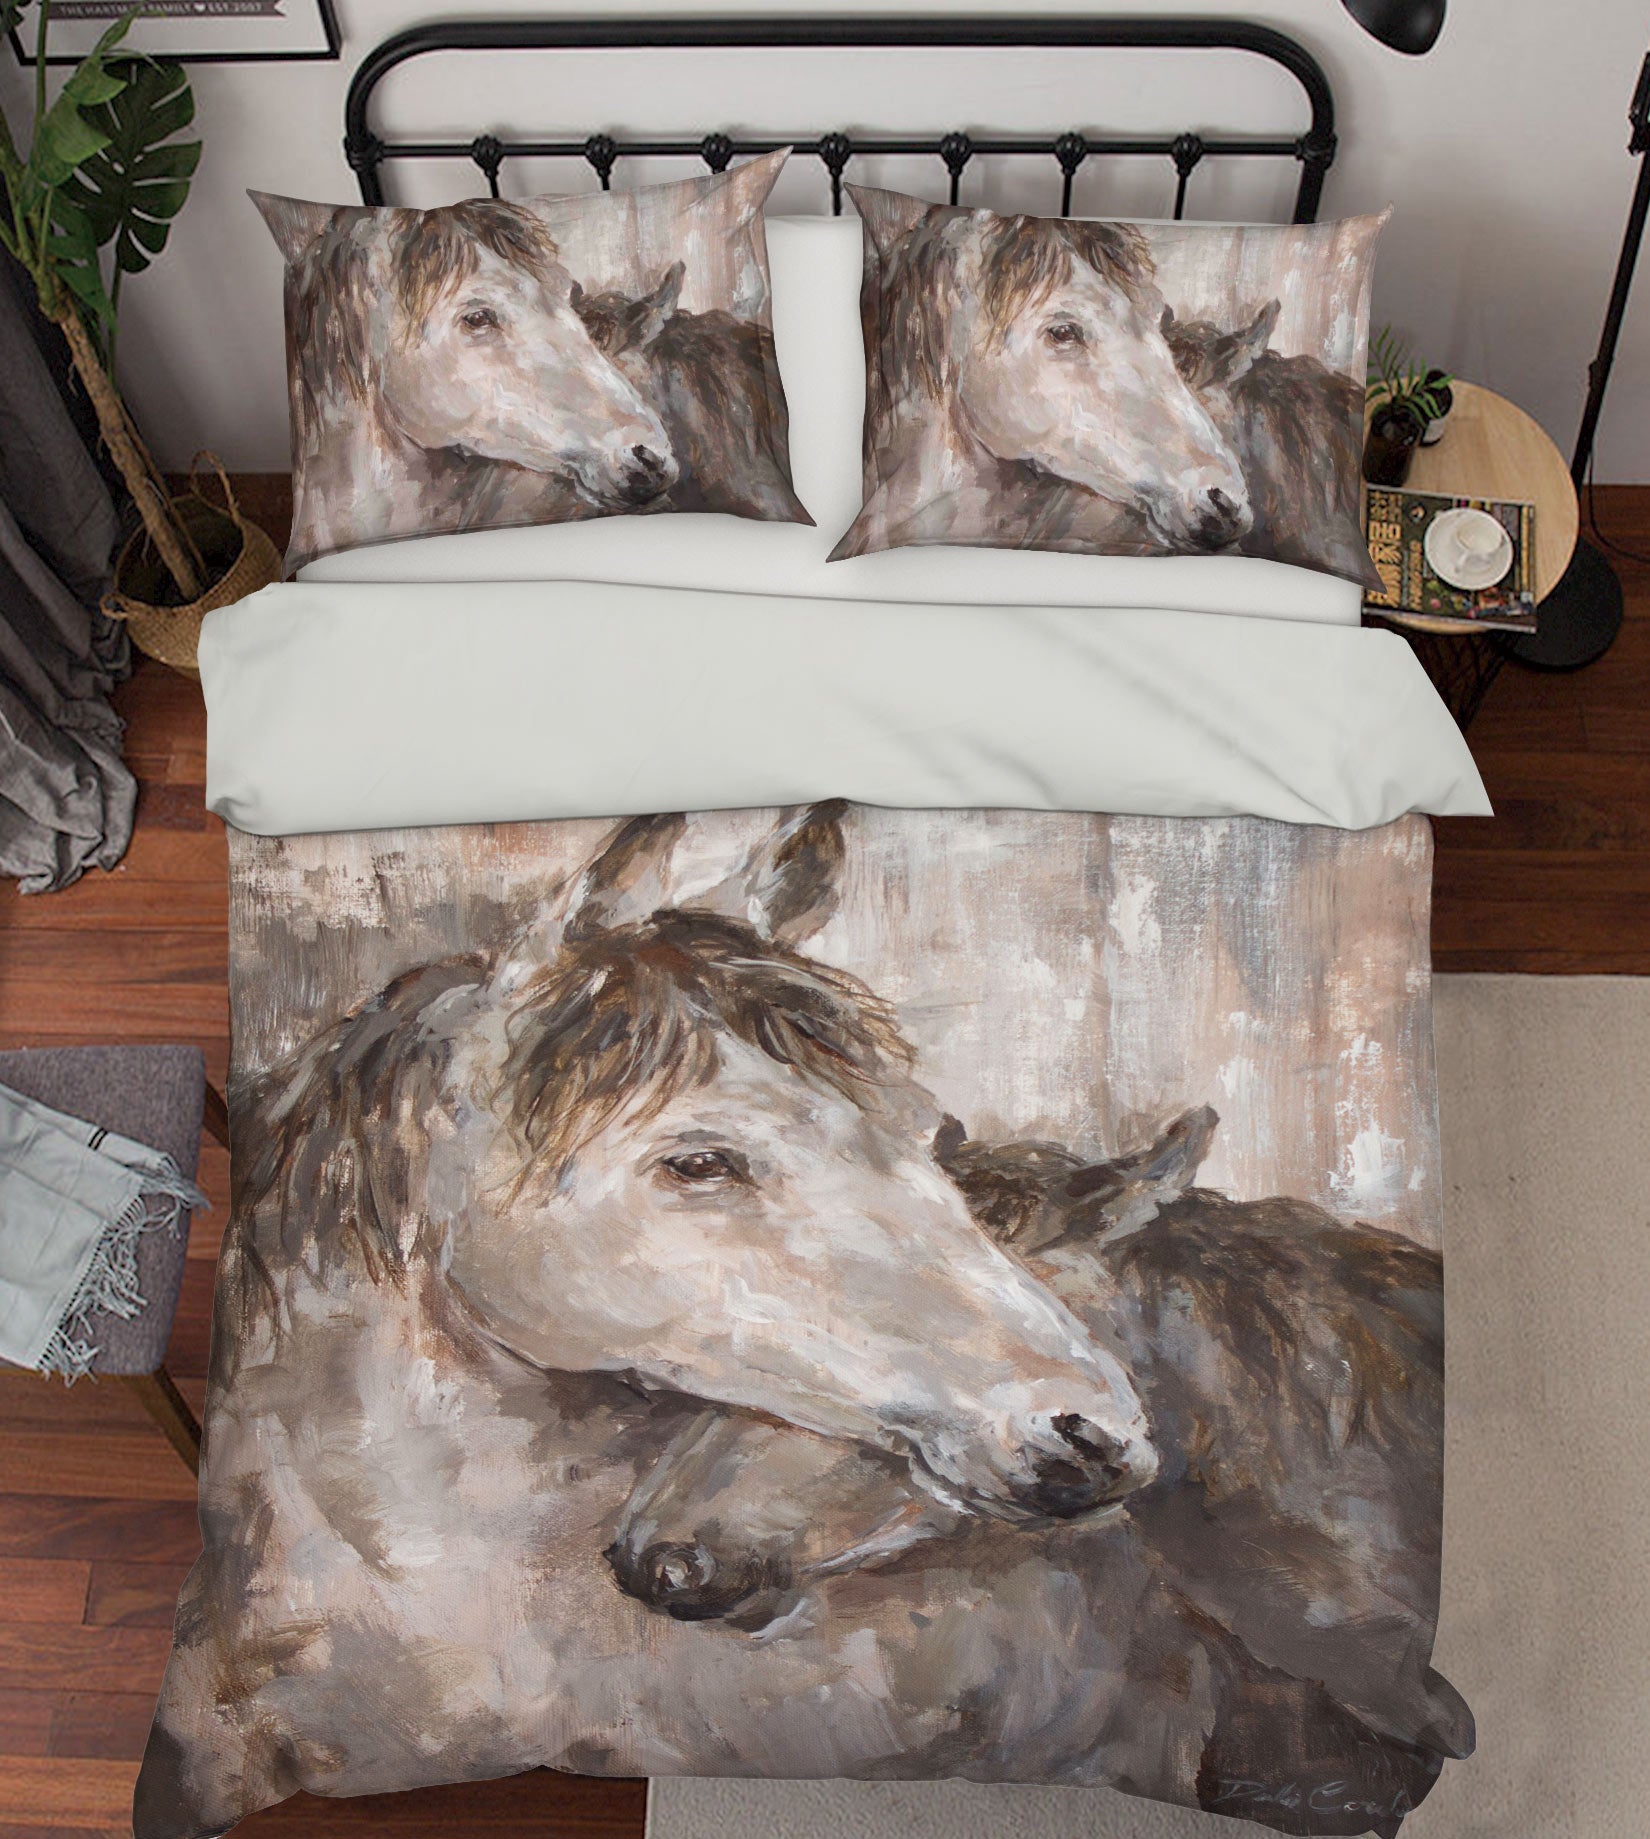 3D Horse 2148 Debi Coules Bedding Bed Pillowcases Quilt